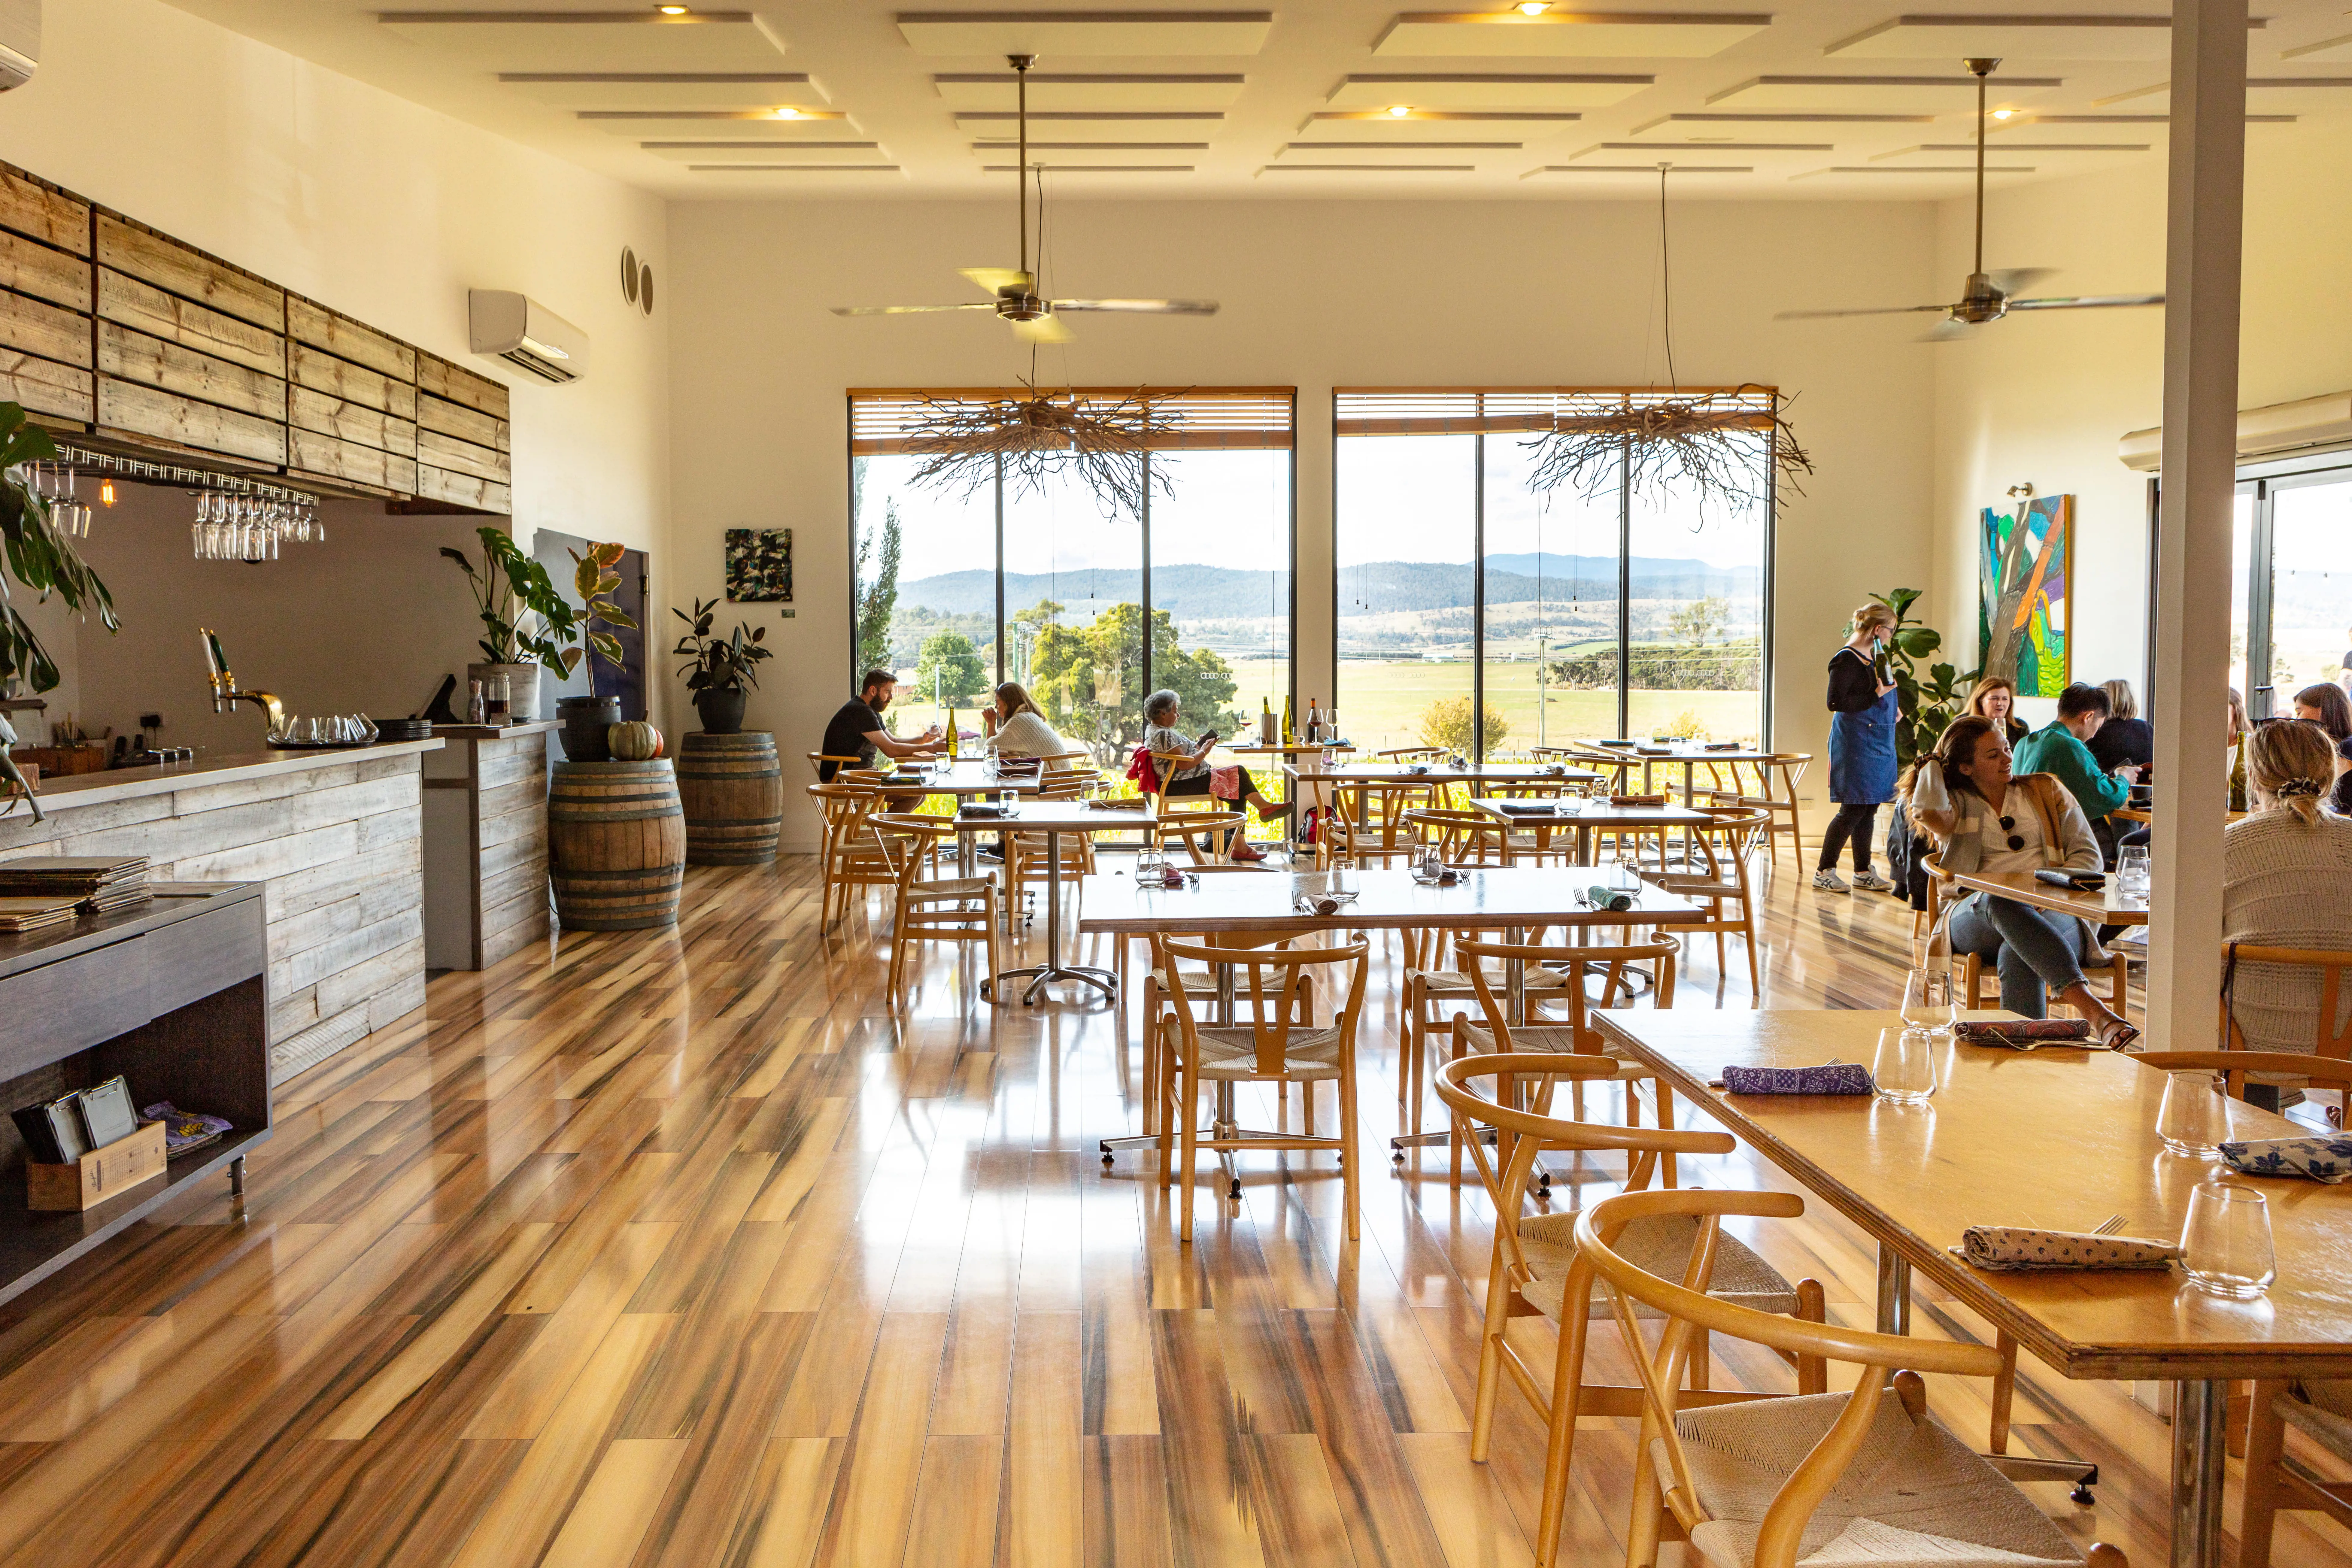 A dining room with wooden floors, and large windows looks out over rolling hills at the Velo Wines vineyard.